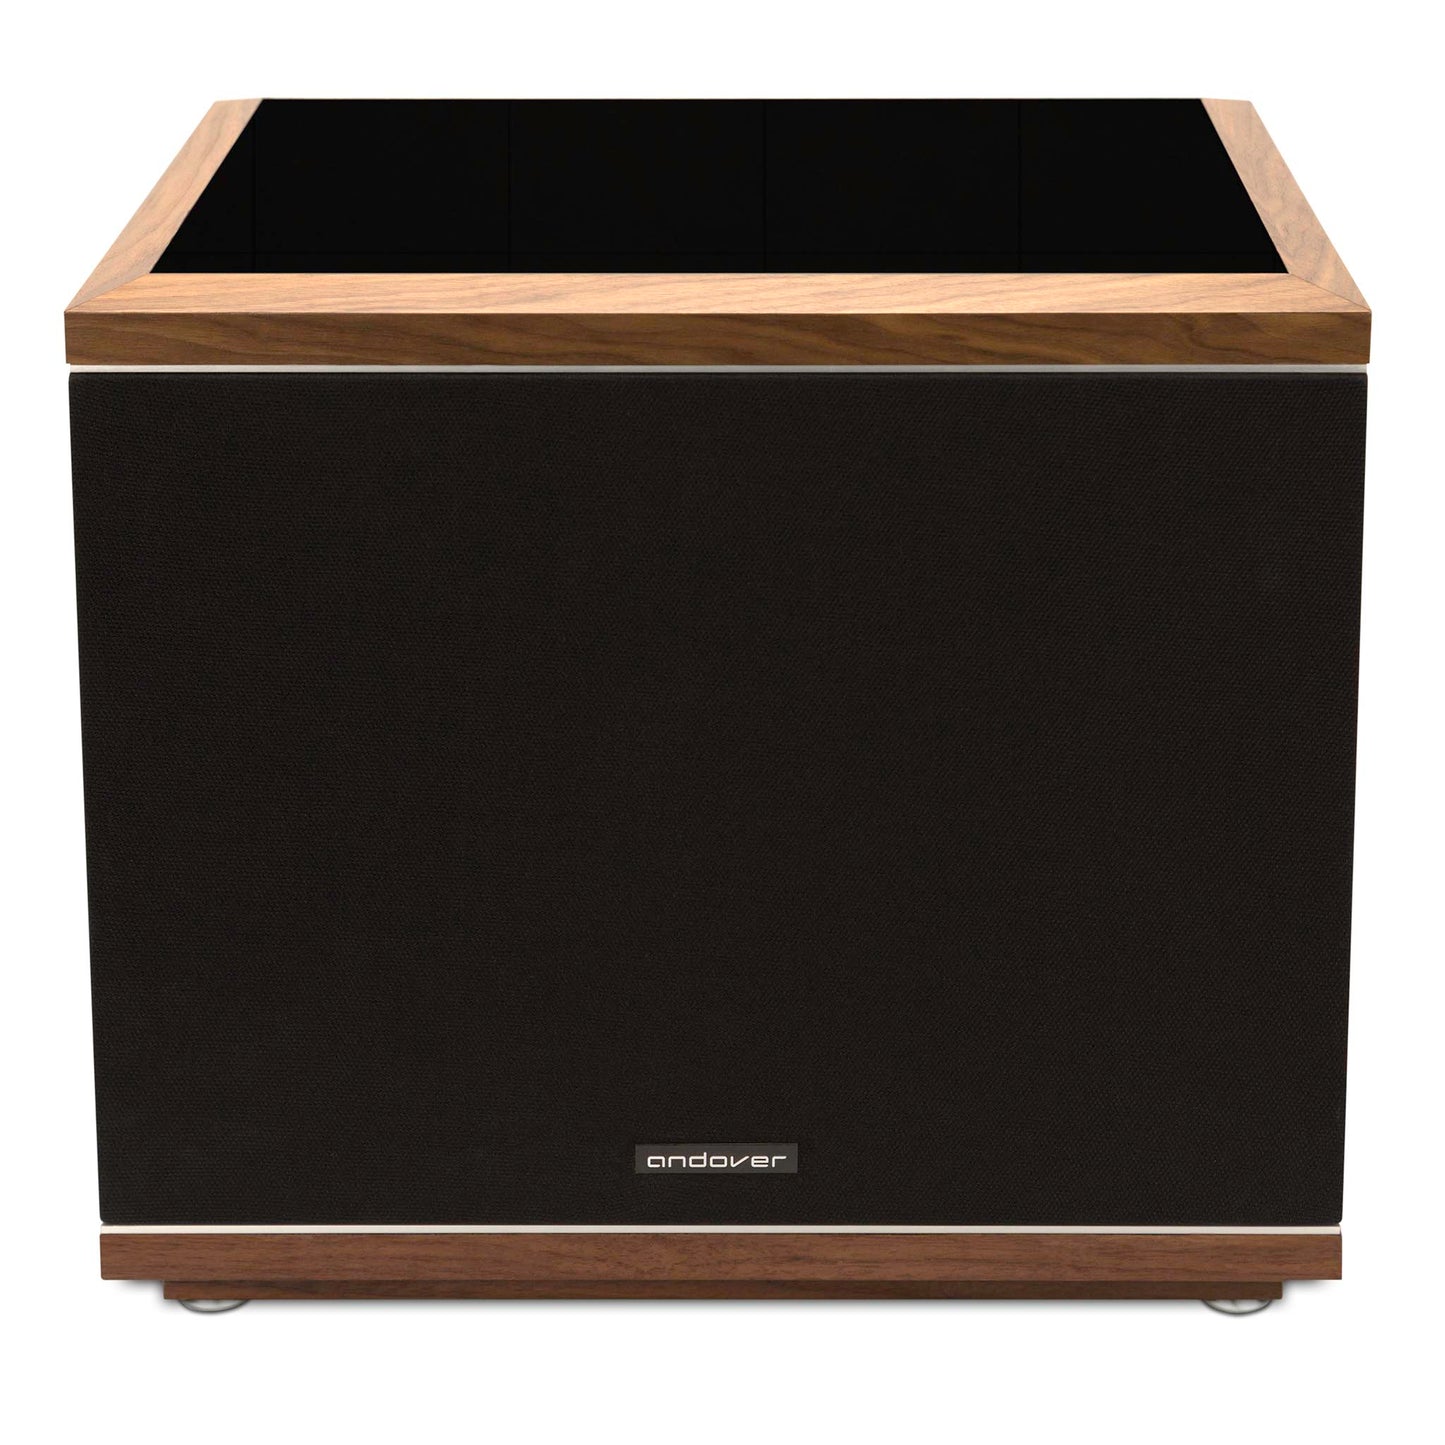 Andover Audio Model One Powered Subwoofer